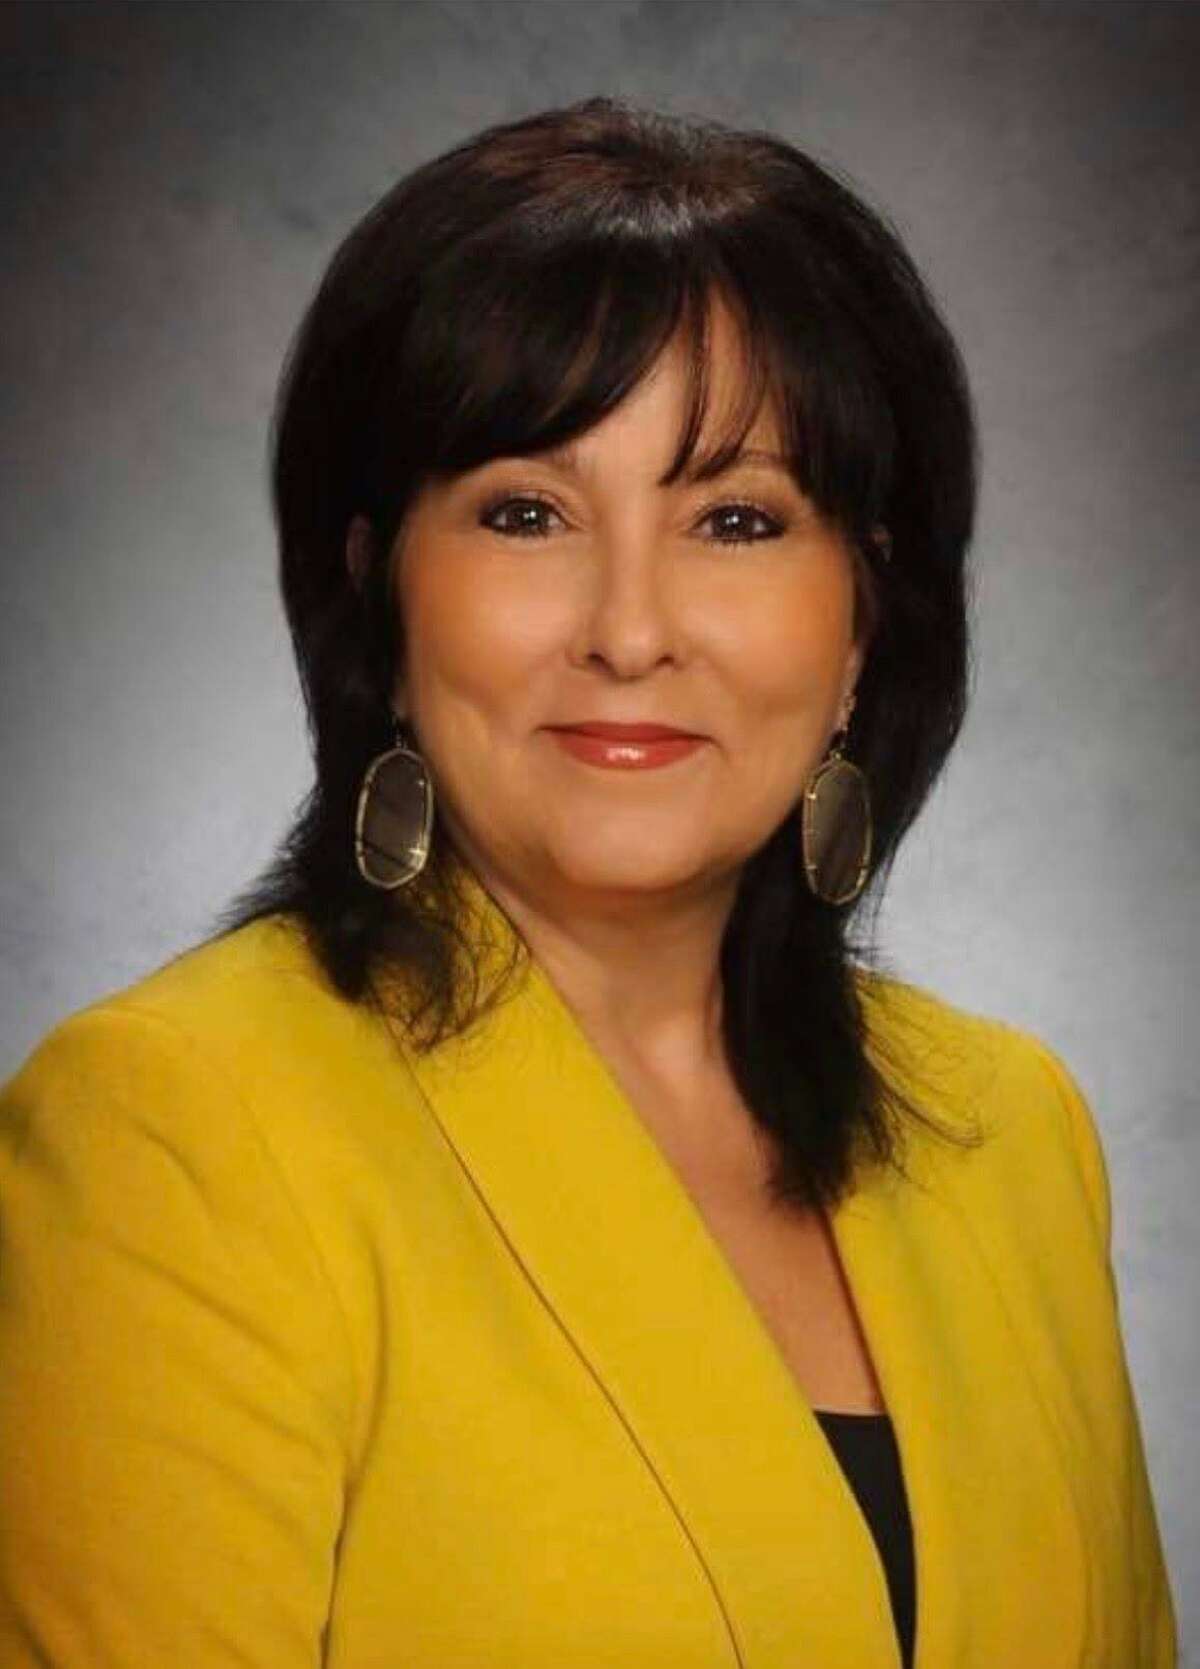 Rebecca Broussard has stepped down from the Willis ISD Board of Trustees after over 20 years serving as a member. She plans to run for the District Seven seat on the Lone Star College Board of Trustees in the November 2022 election.